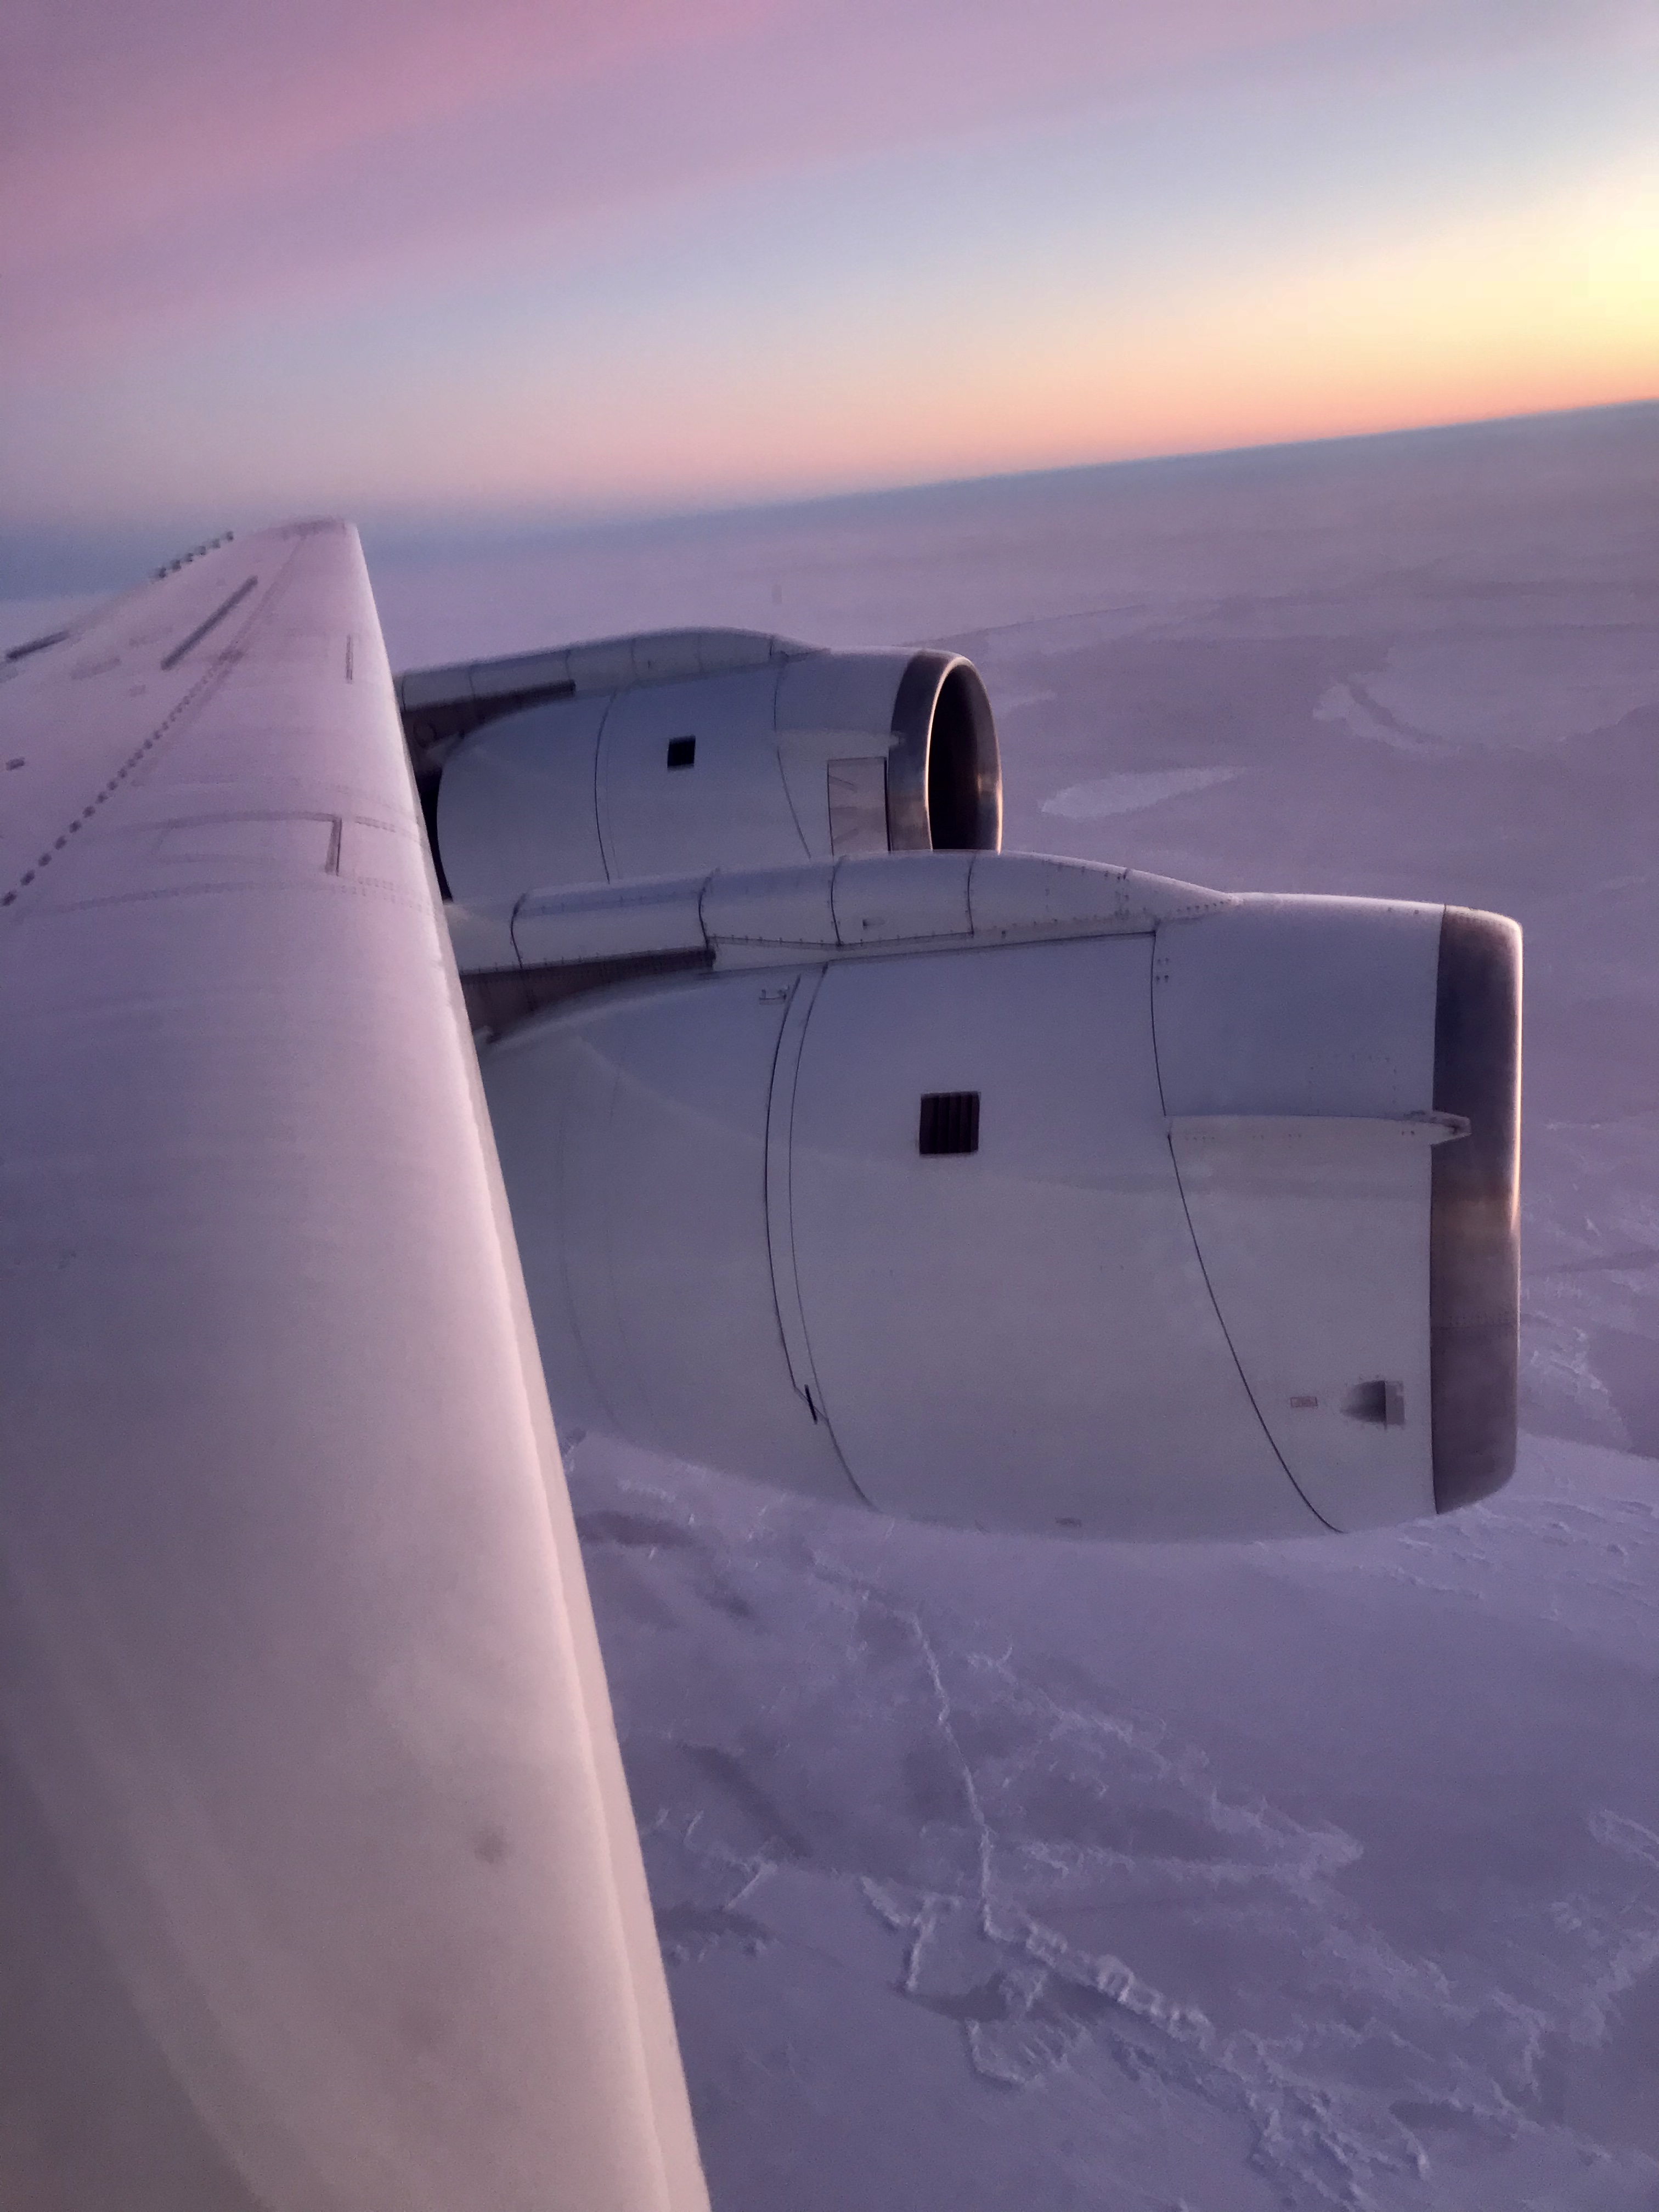 A view of NASA's DC-8 engines and wing as we were chasing the sea ice below.